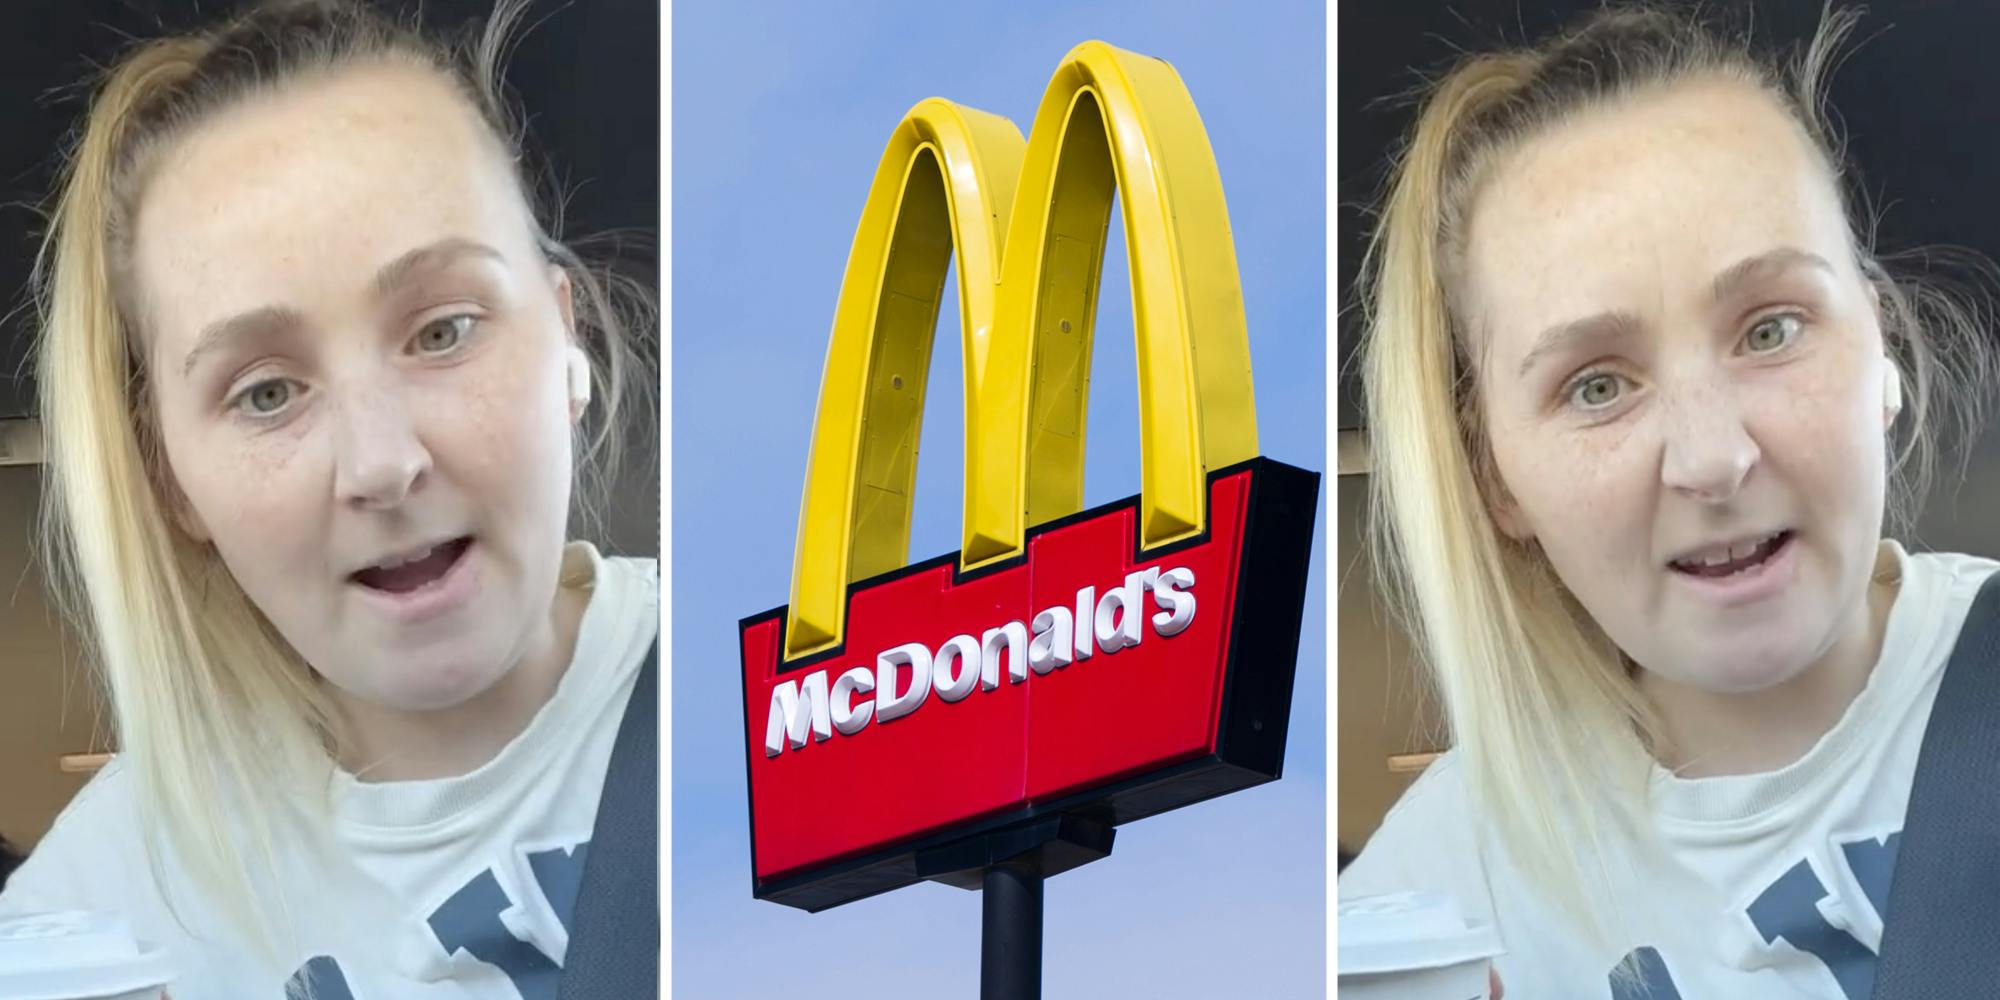 ‘I am shocked at this laziness’: McDonald’s customer orders large iced coffee, finds out she got bamboozled